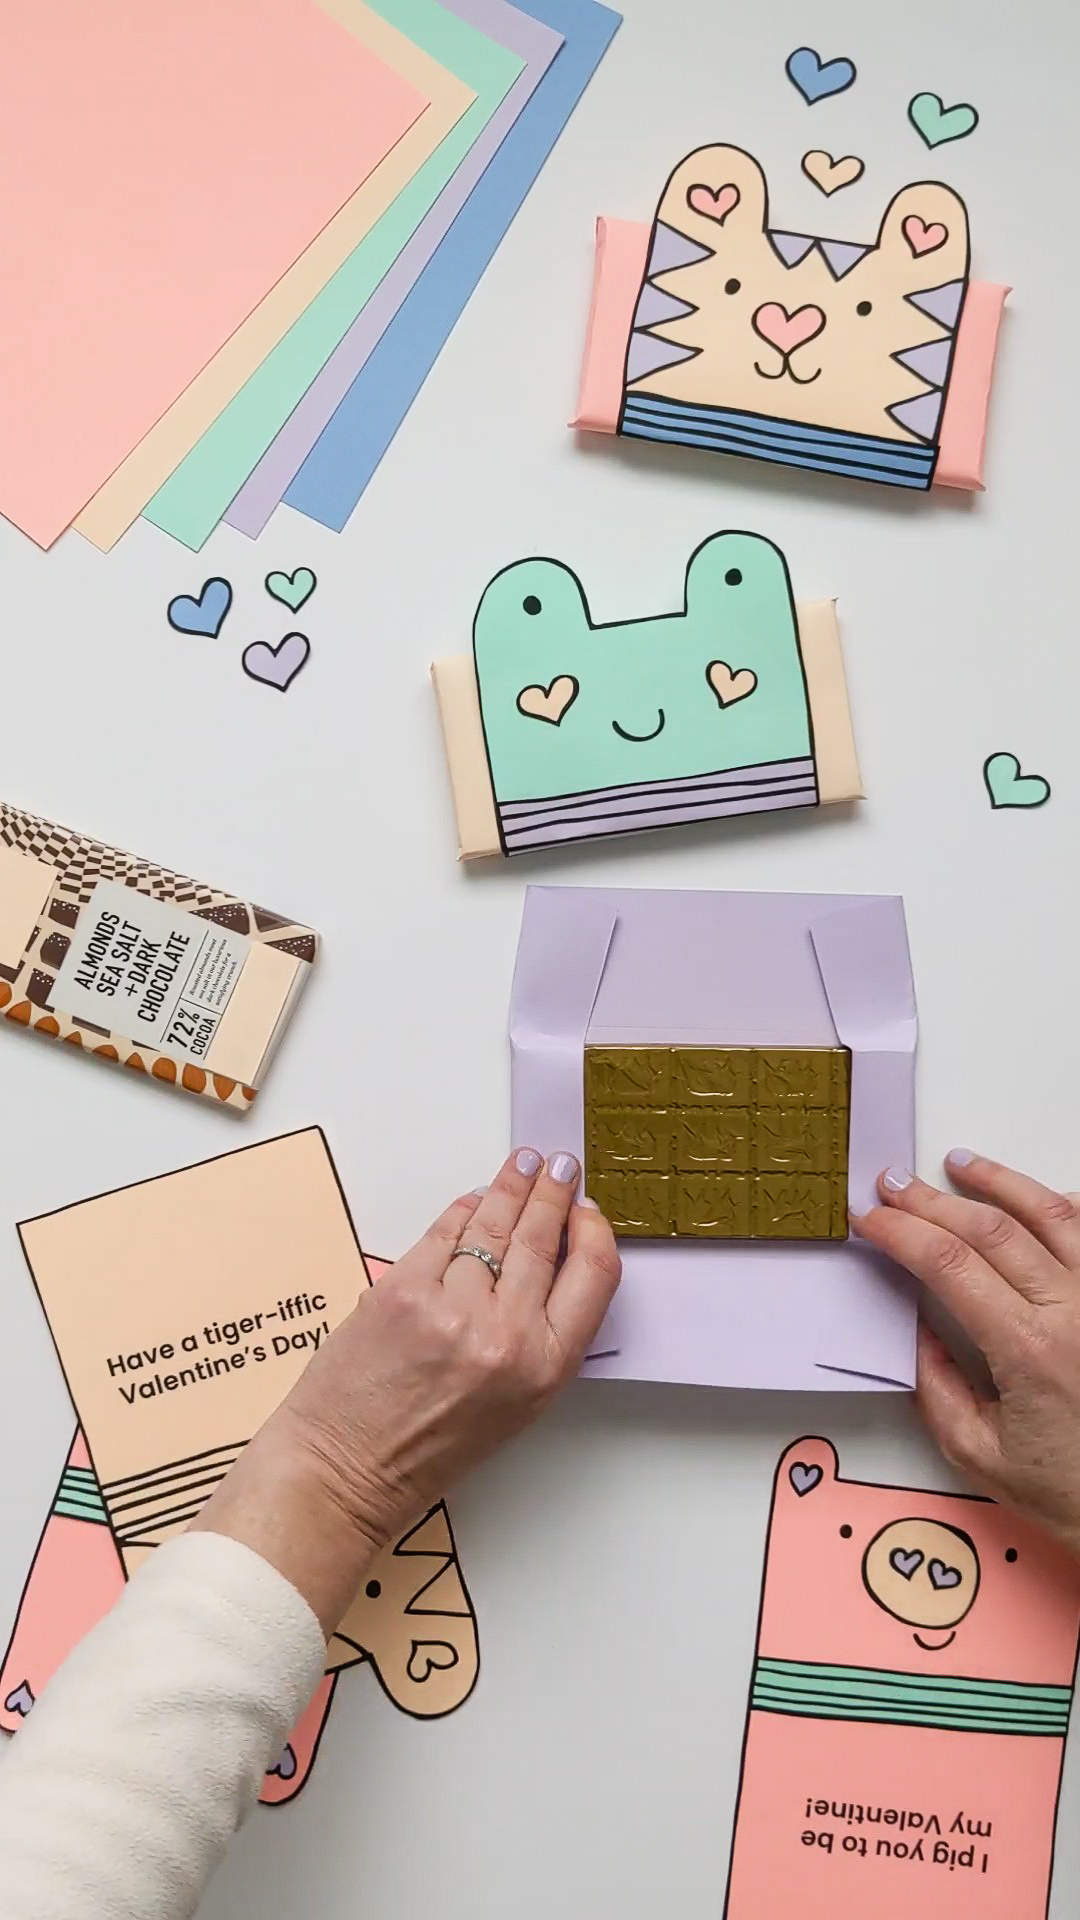 How to wrap chocolate bars with paper templates for Valentine's Day